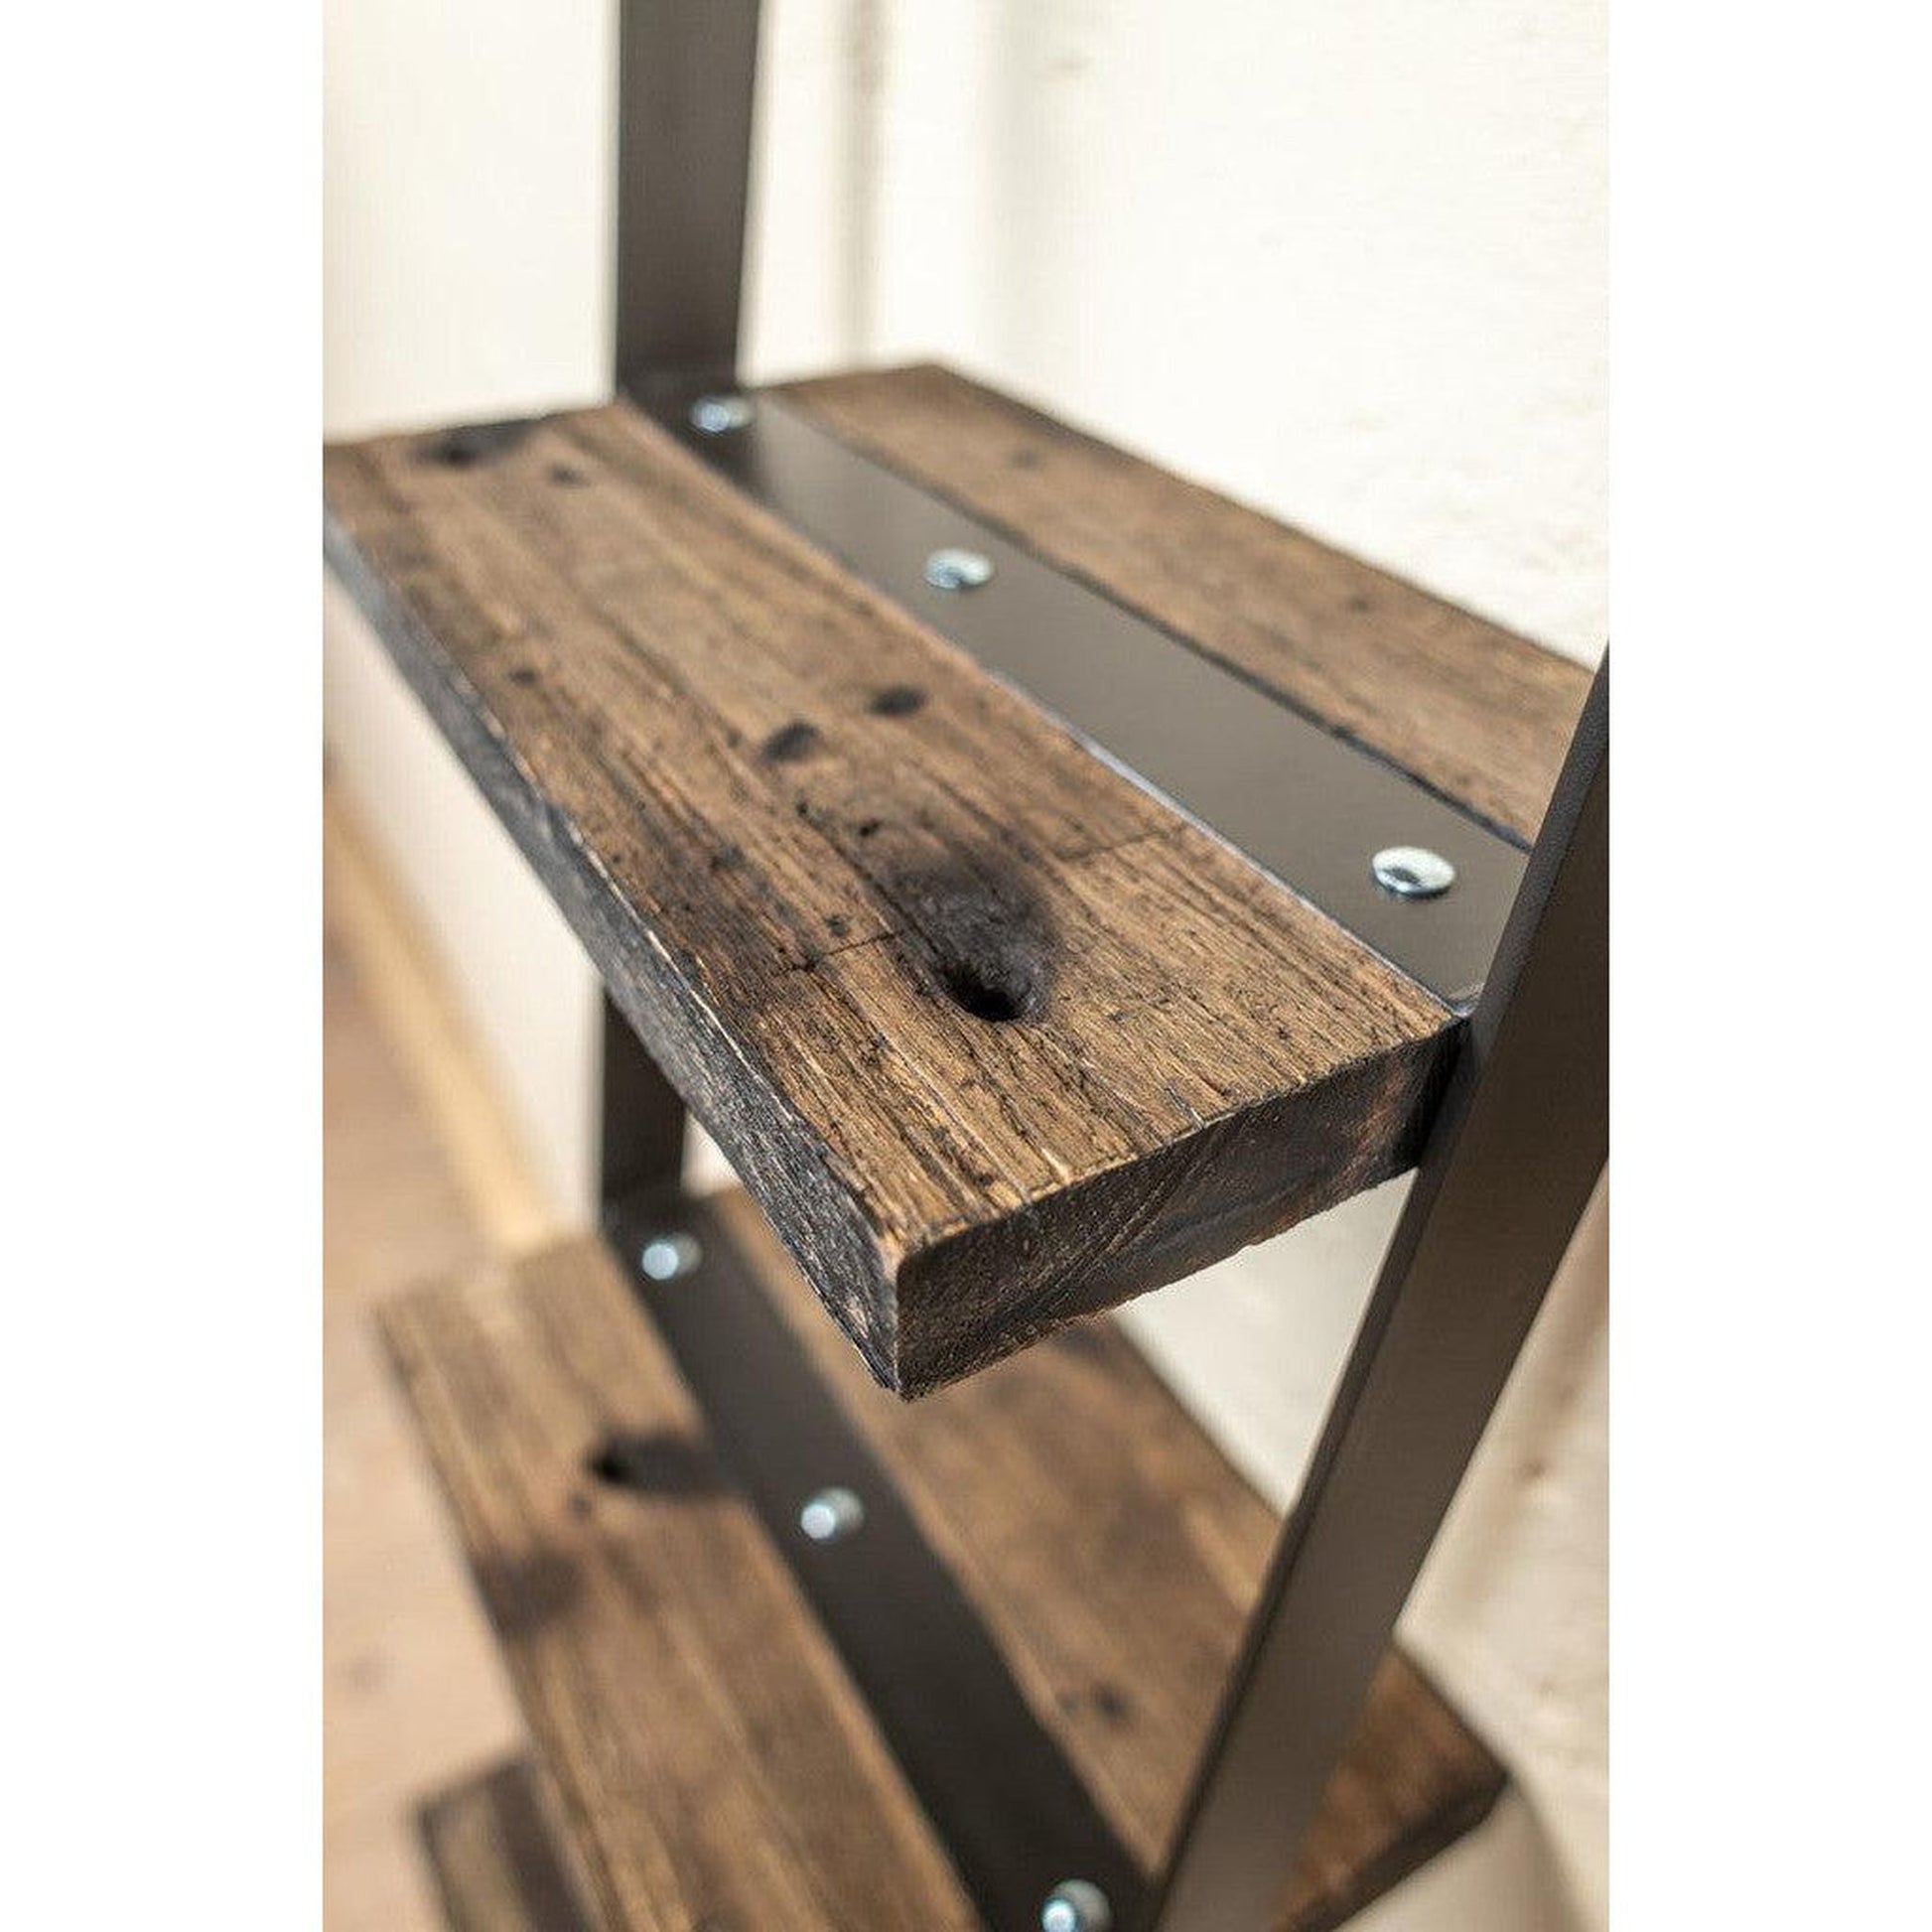 Stone County Ironworks Urban Forge 16" Natural Black Narrow Iron Ladder Wall Shelf With Oil Stained Oak Wood Finish